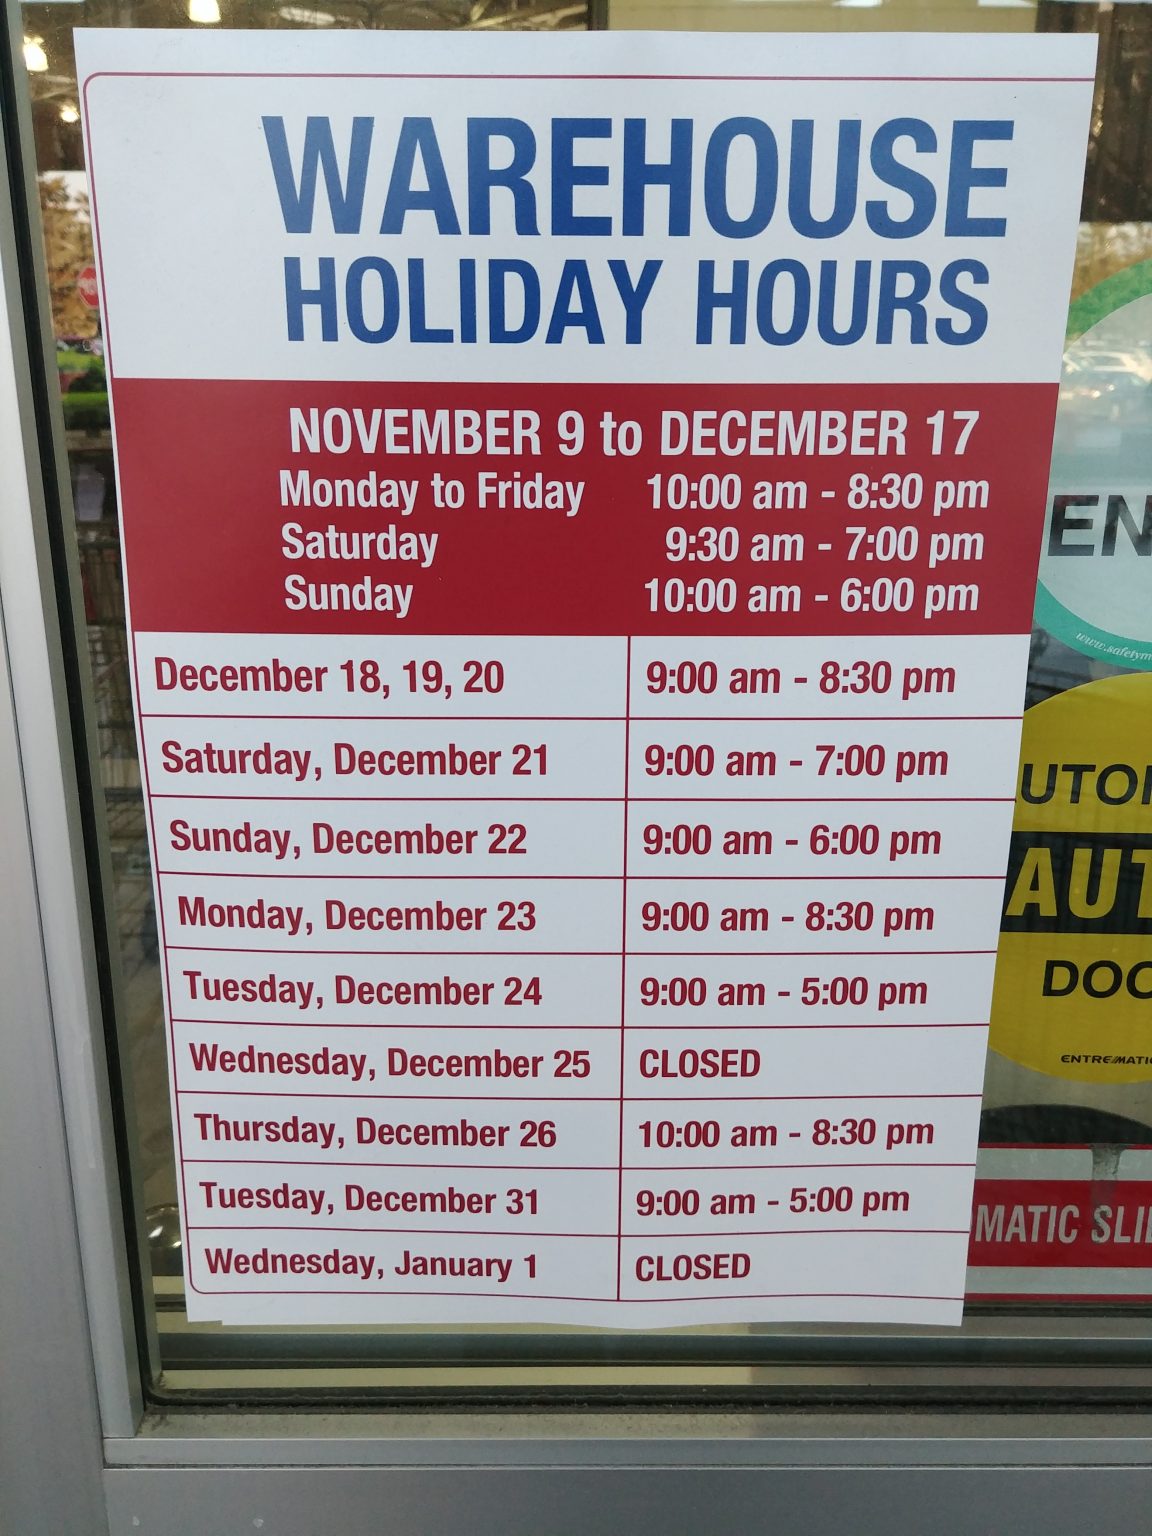 costco-holiday-hours-update-dec-22nd-2019-costco-east-fan-blog